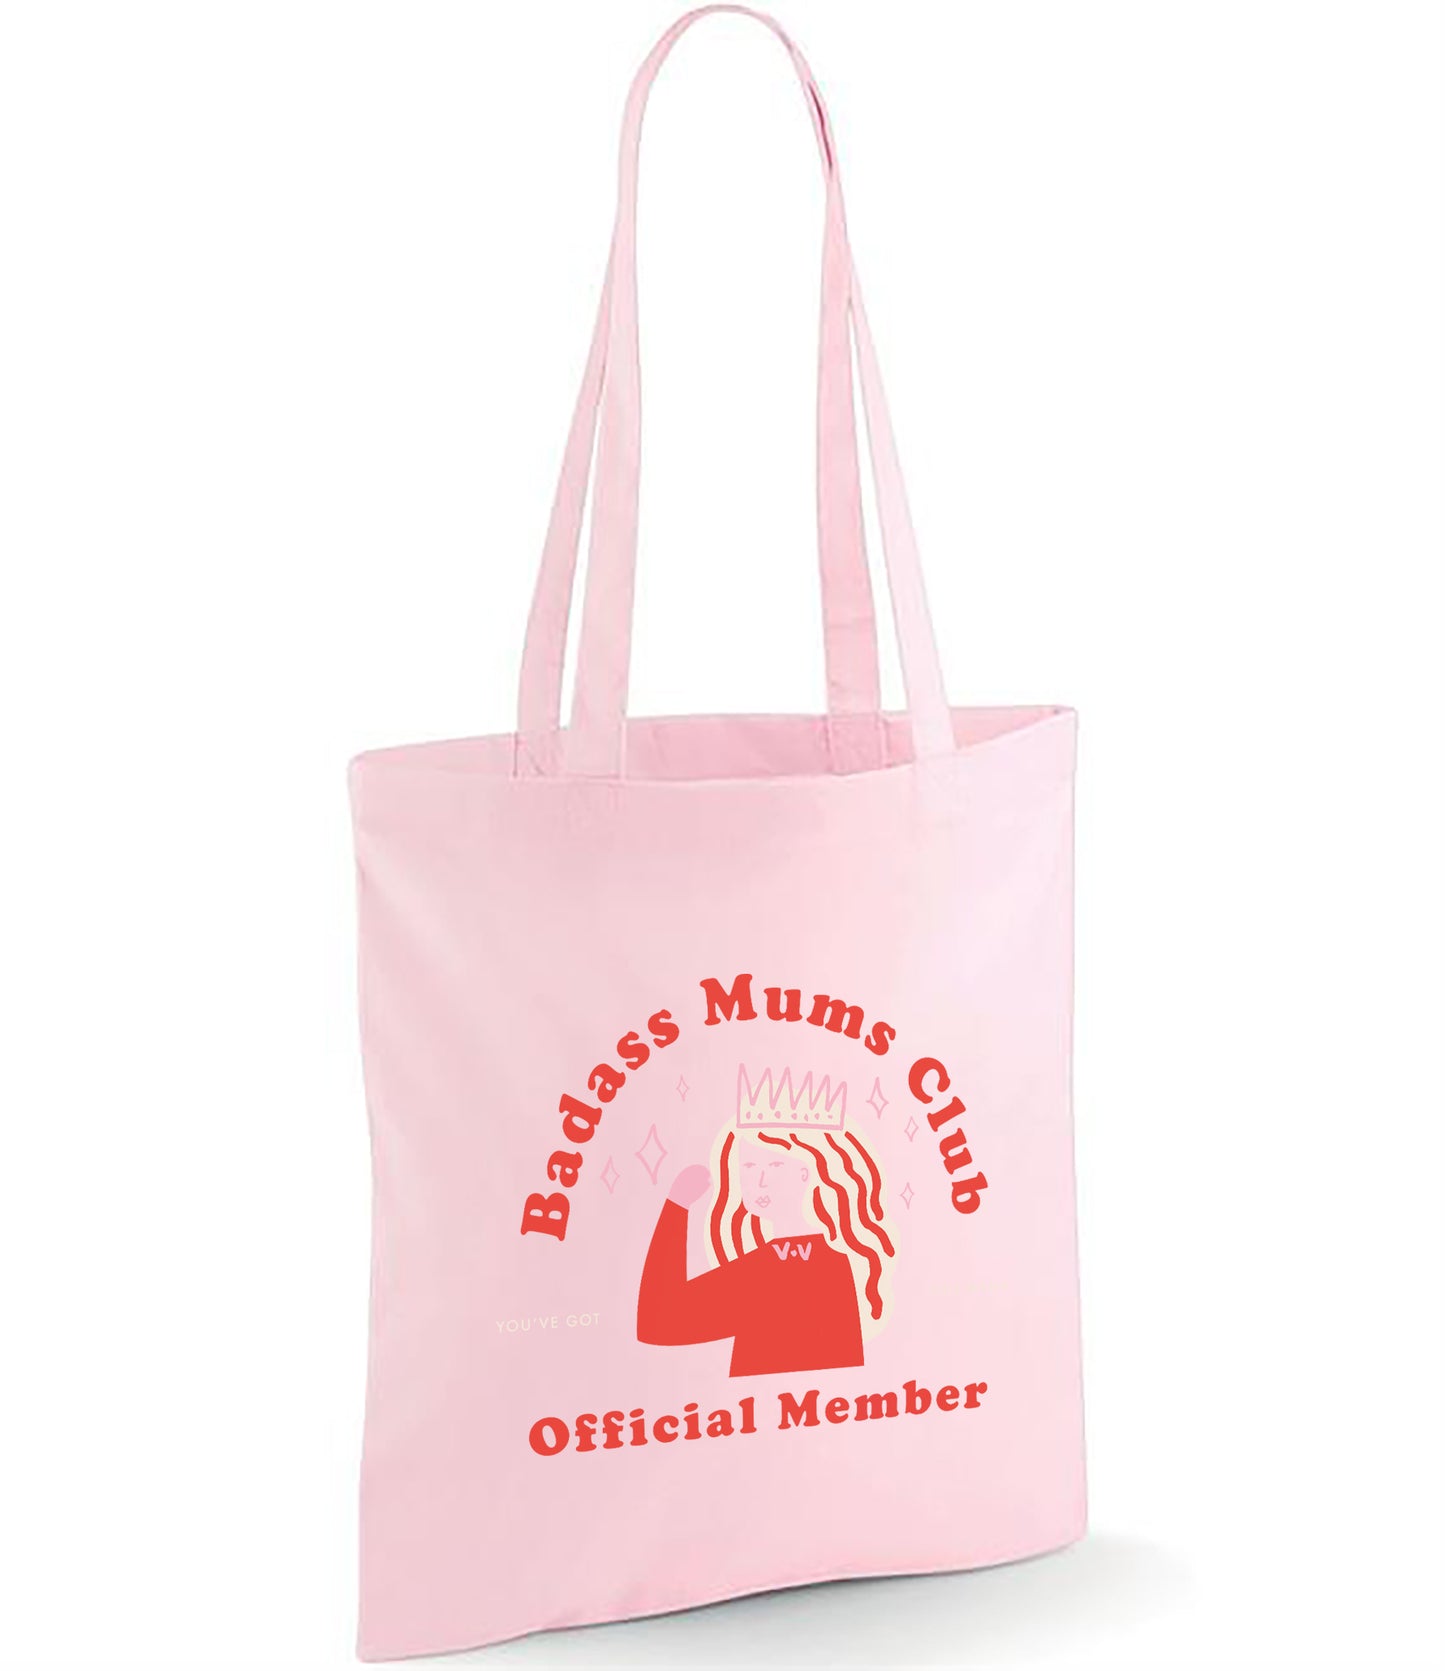 Badass Mums Club! Mother's Day Tote Bag